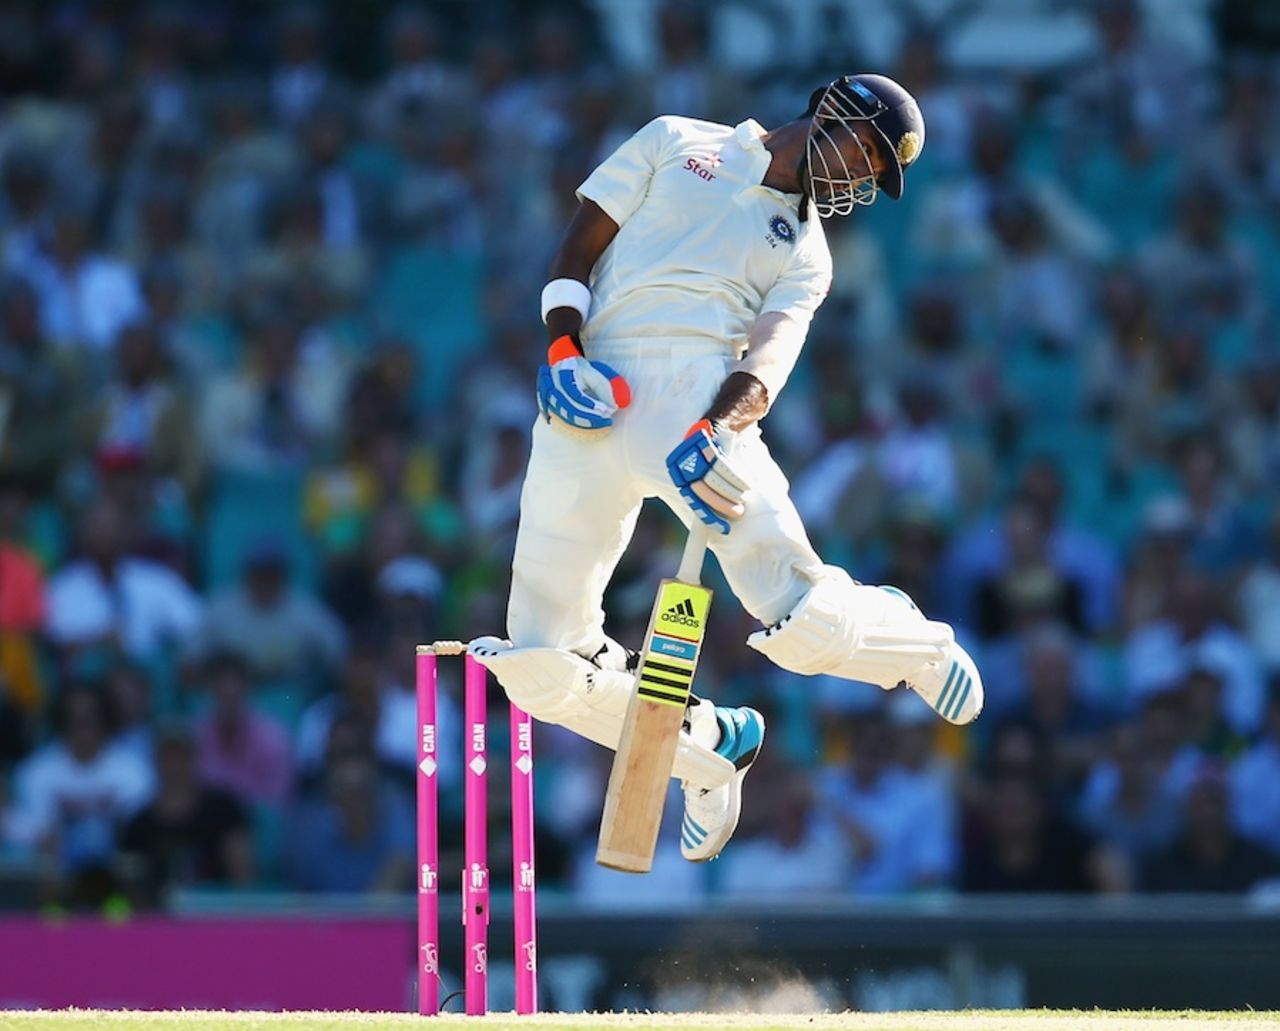 KL Rahul jumps to evade a short ball, Australia v India, 4th Test, Sydney, 2nd day, January 7, 2015